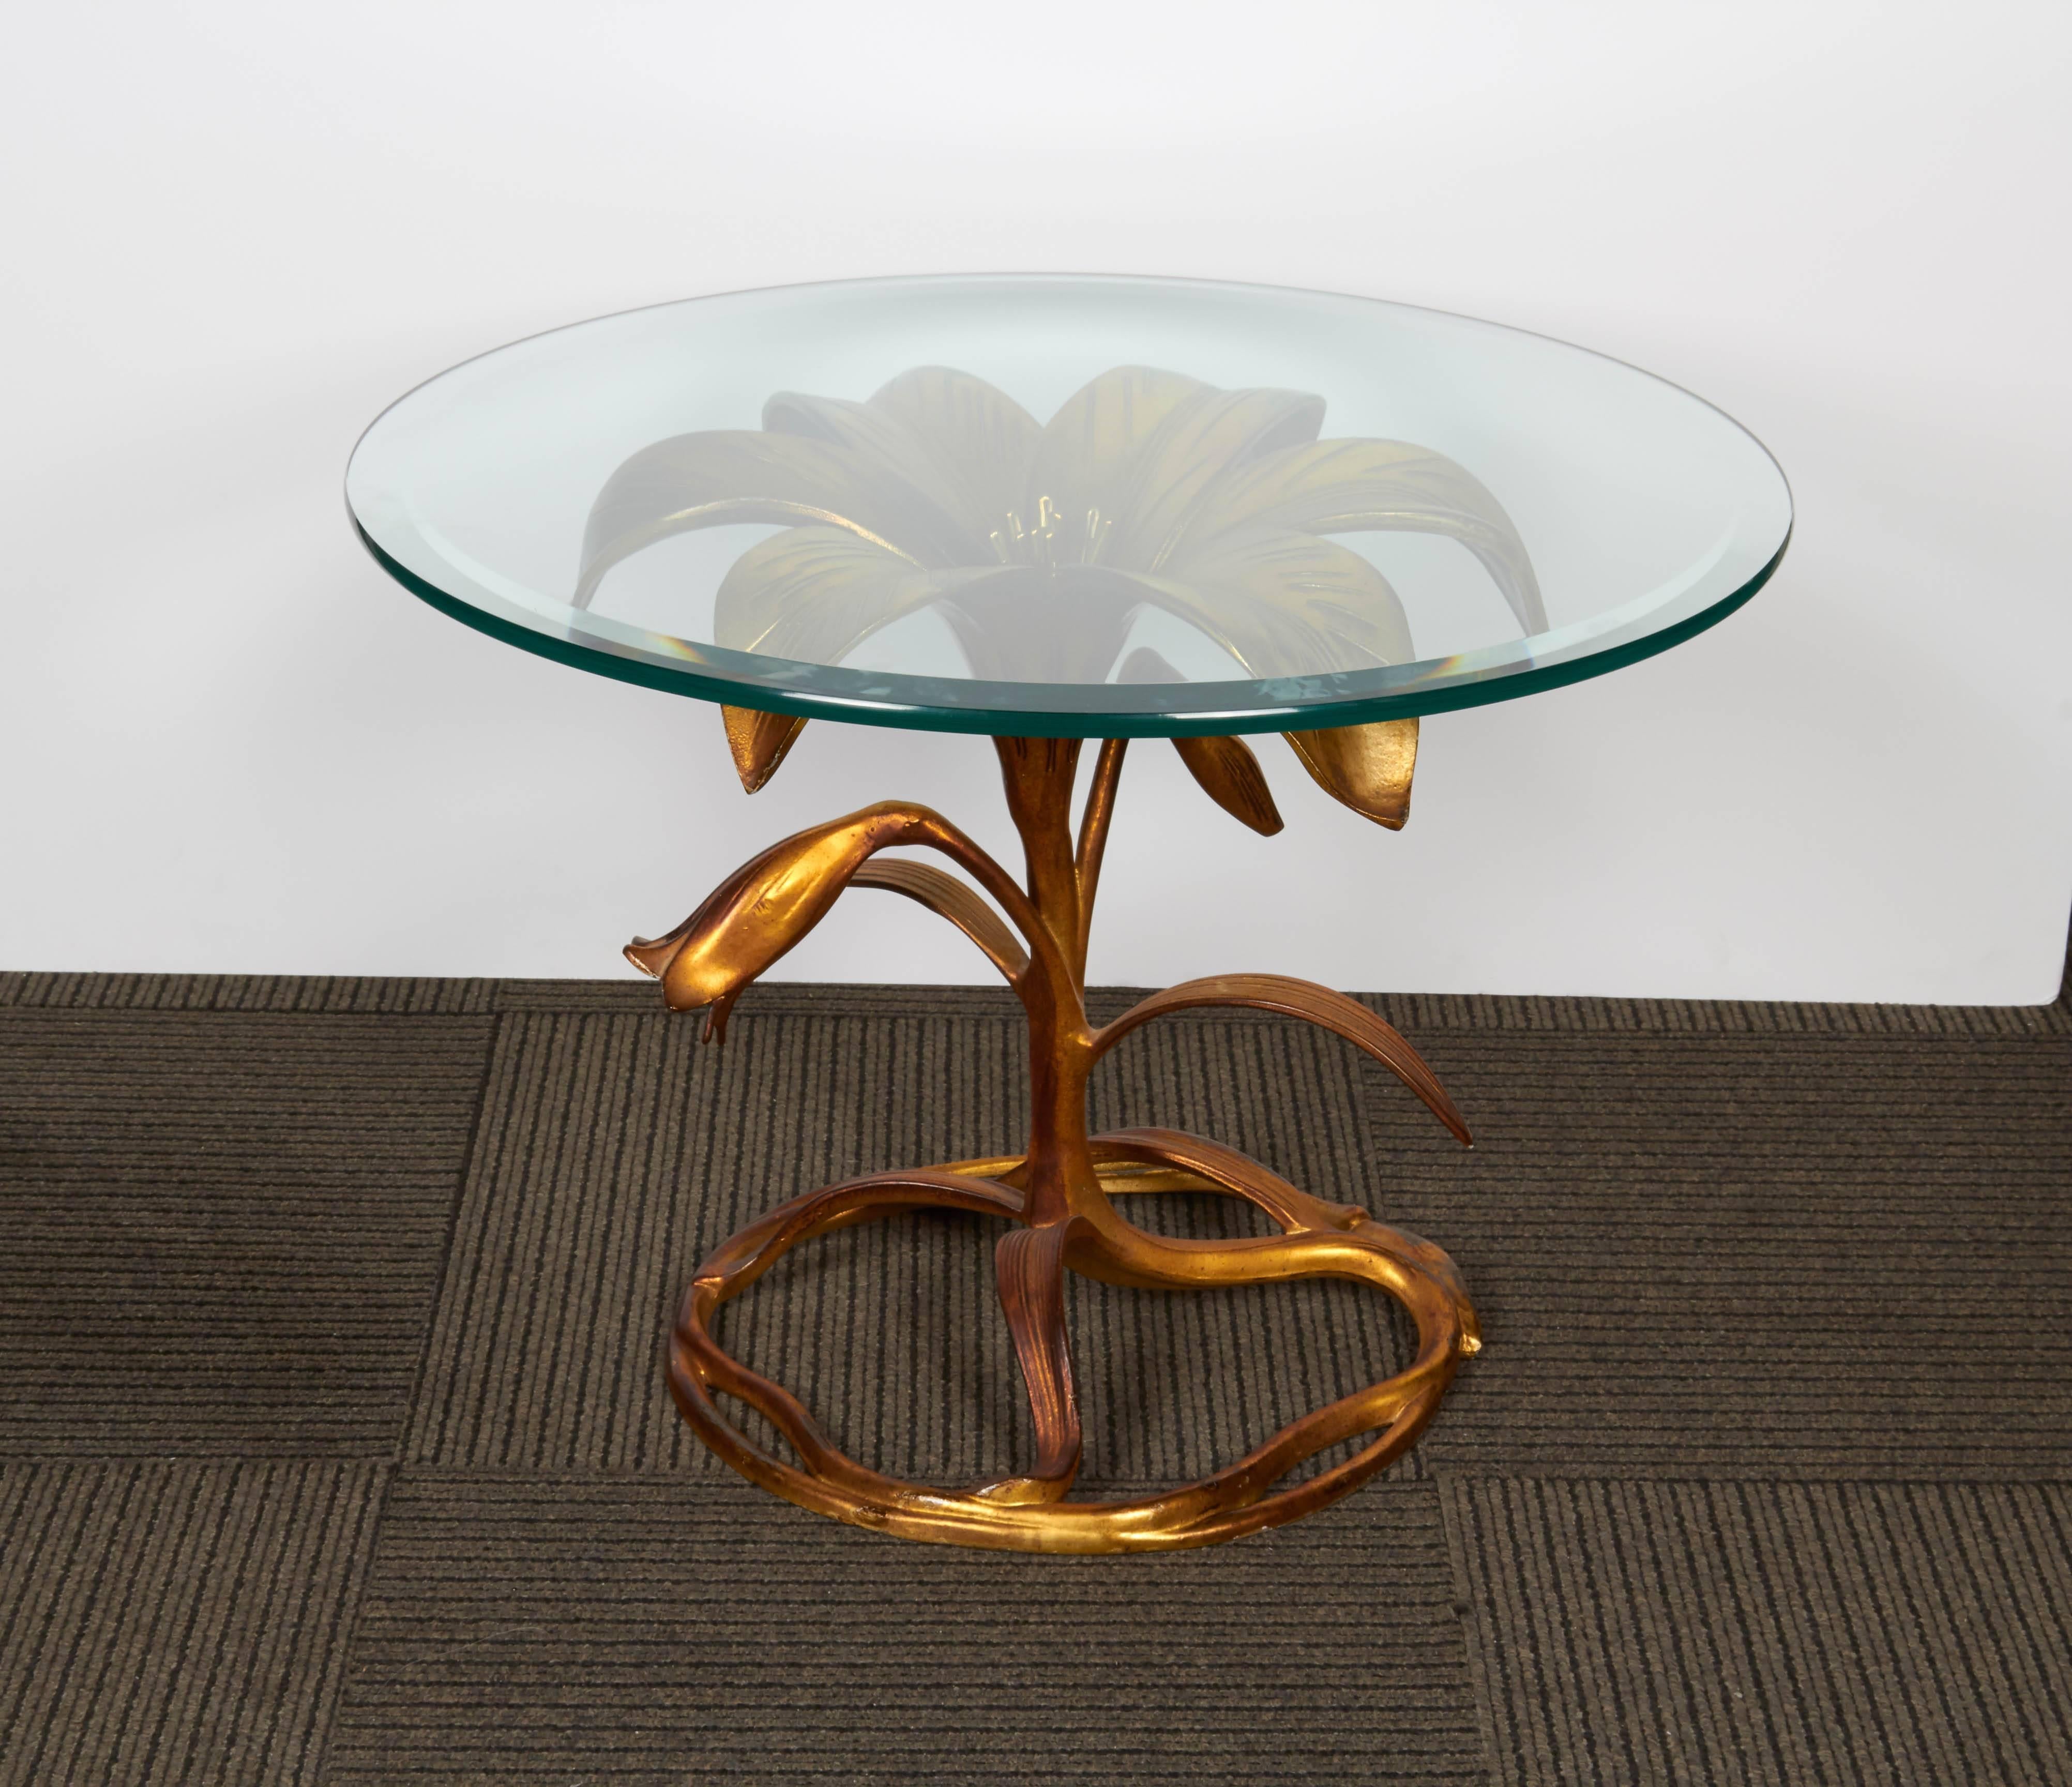 A sculptural table by Arthur Court, produced circa 1960s with a round, beveled glass top on a gilt metal base, whimsically designed as a curling lily. Very good vintage condition with minimal wear to gilding, consistent with age; dimensions provided